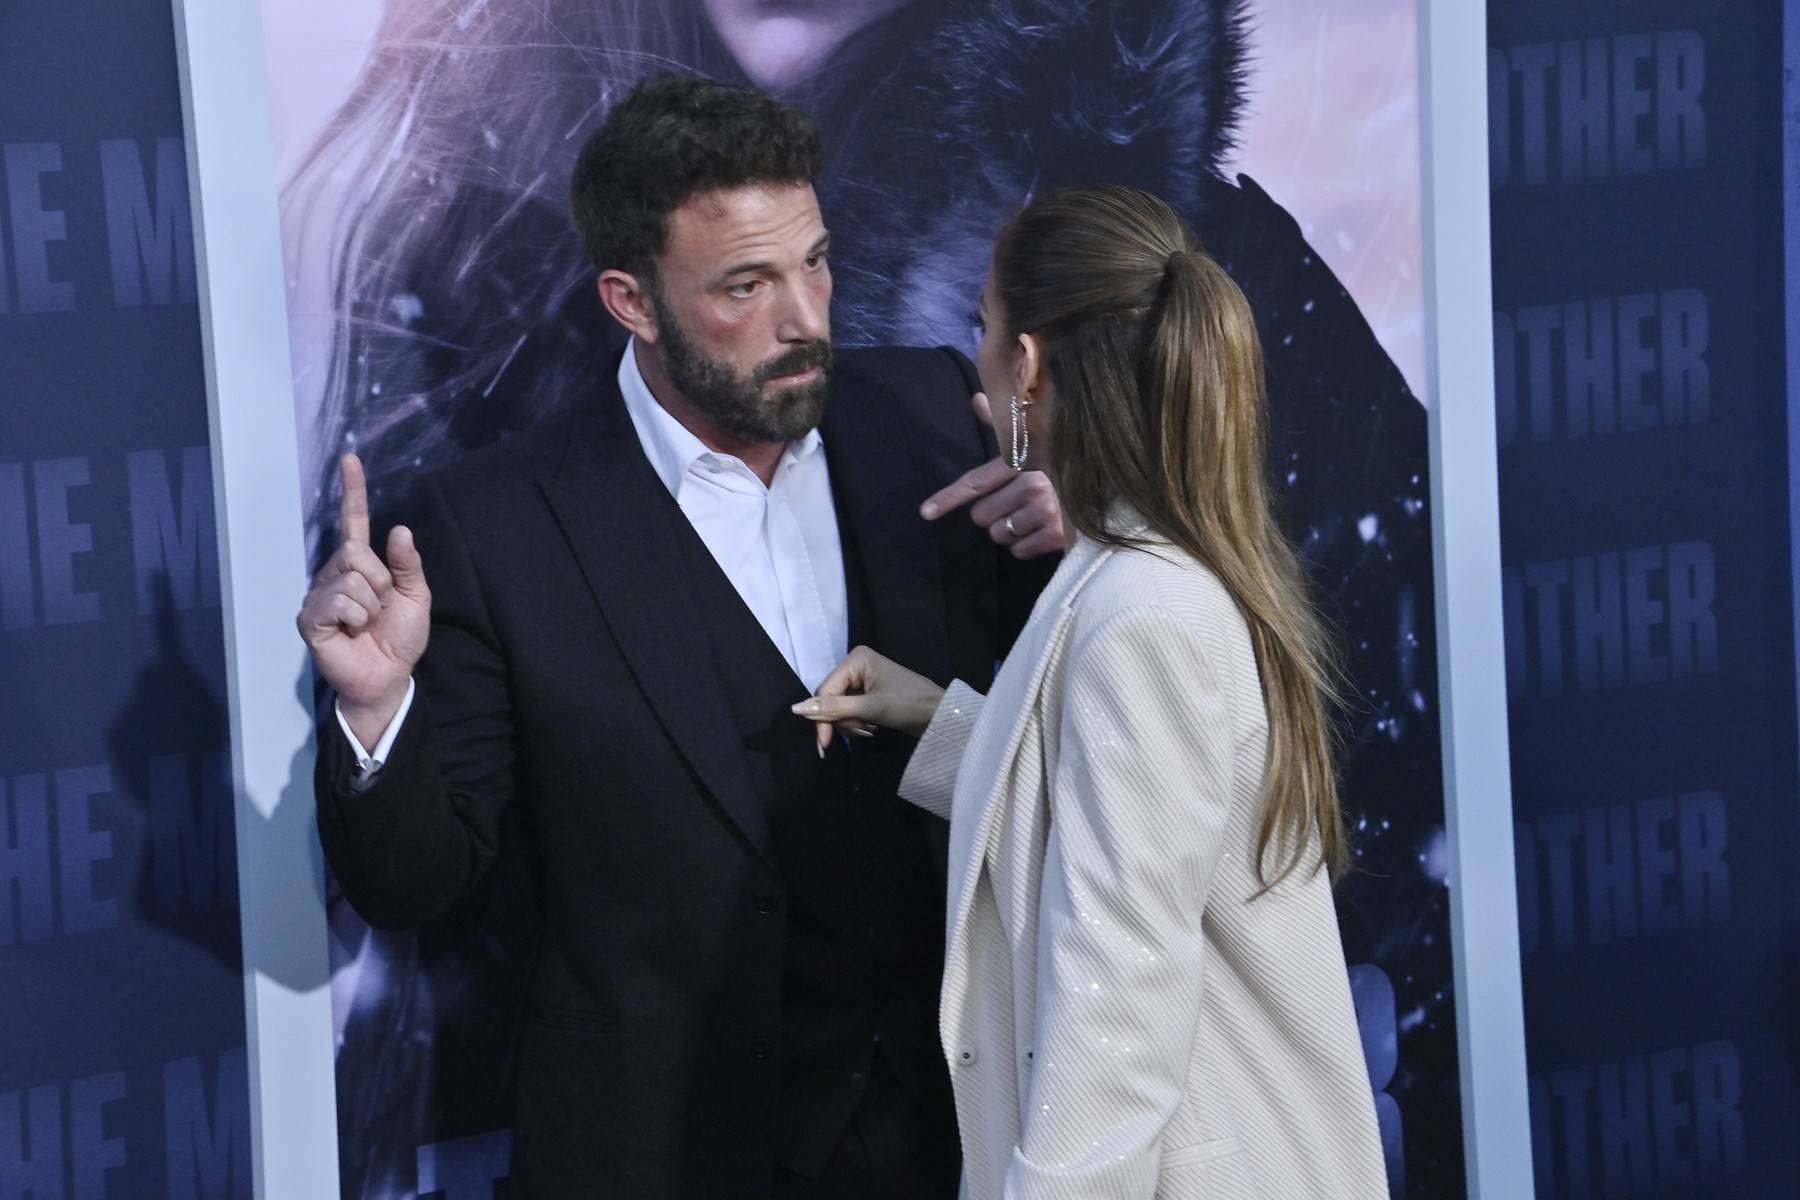 Jennifer Lopez and Ben Affleck Attend "The Mother" Premiere in Los Angeles